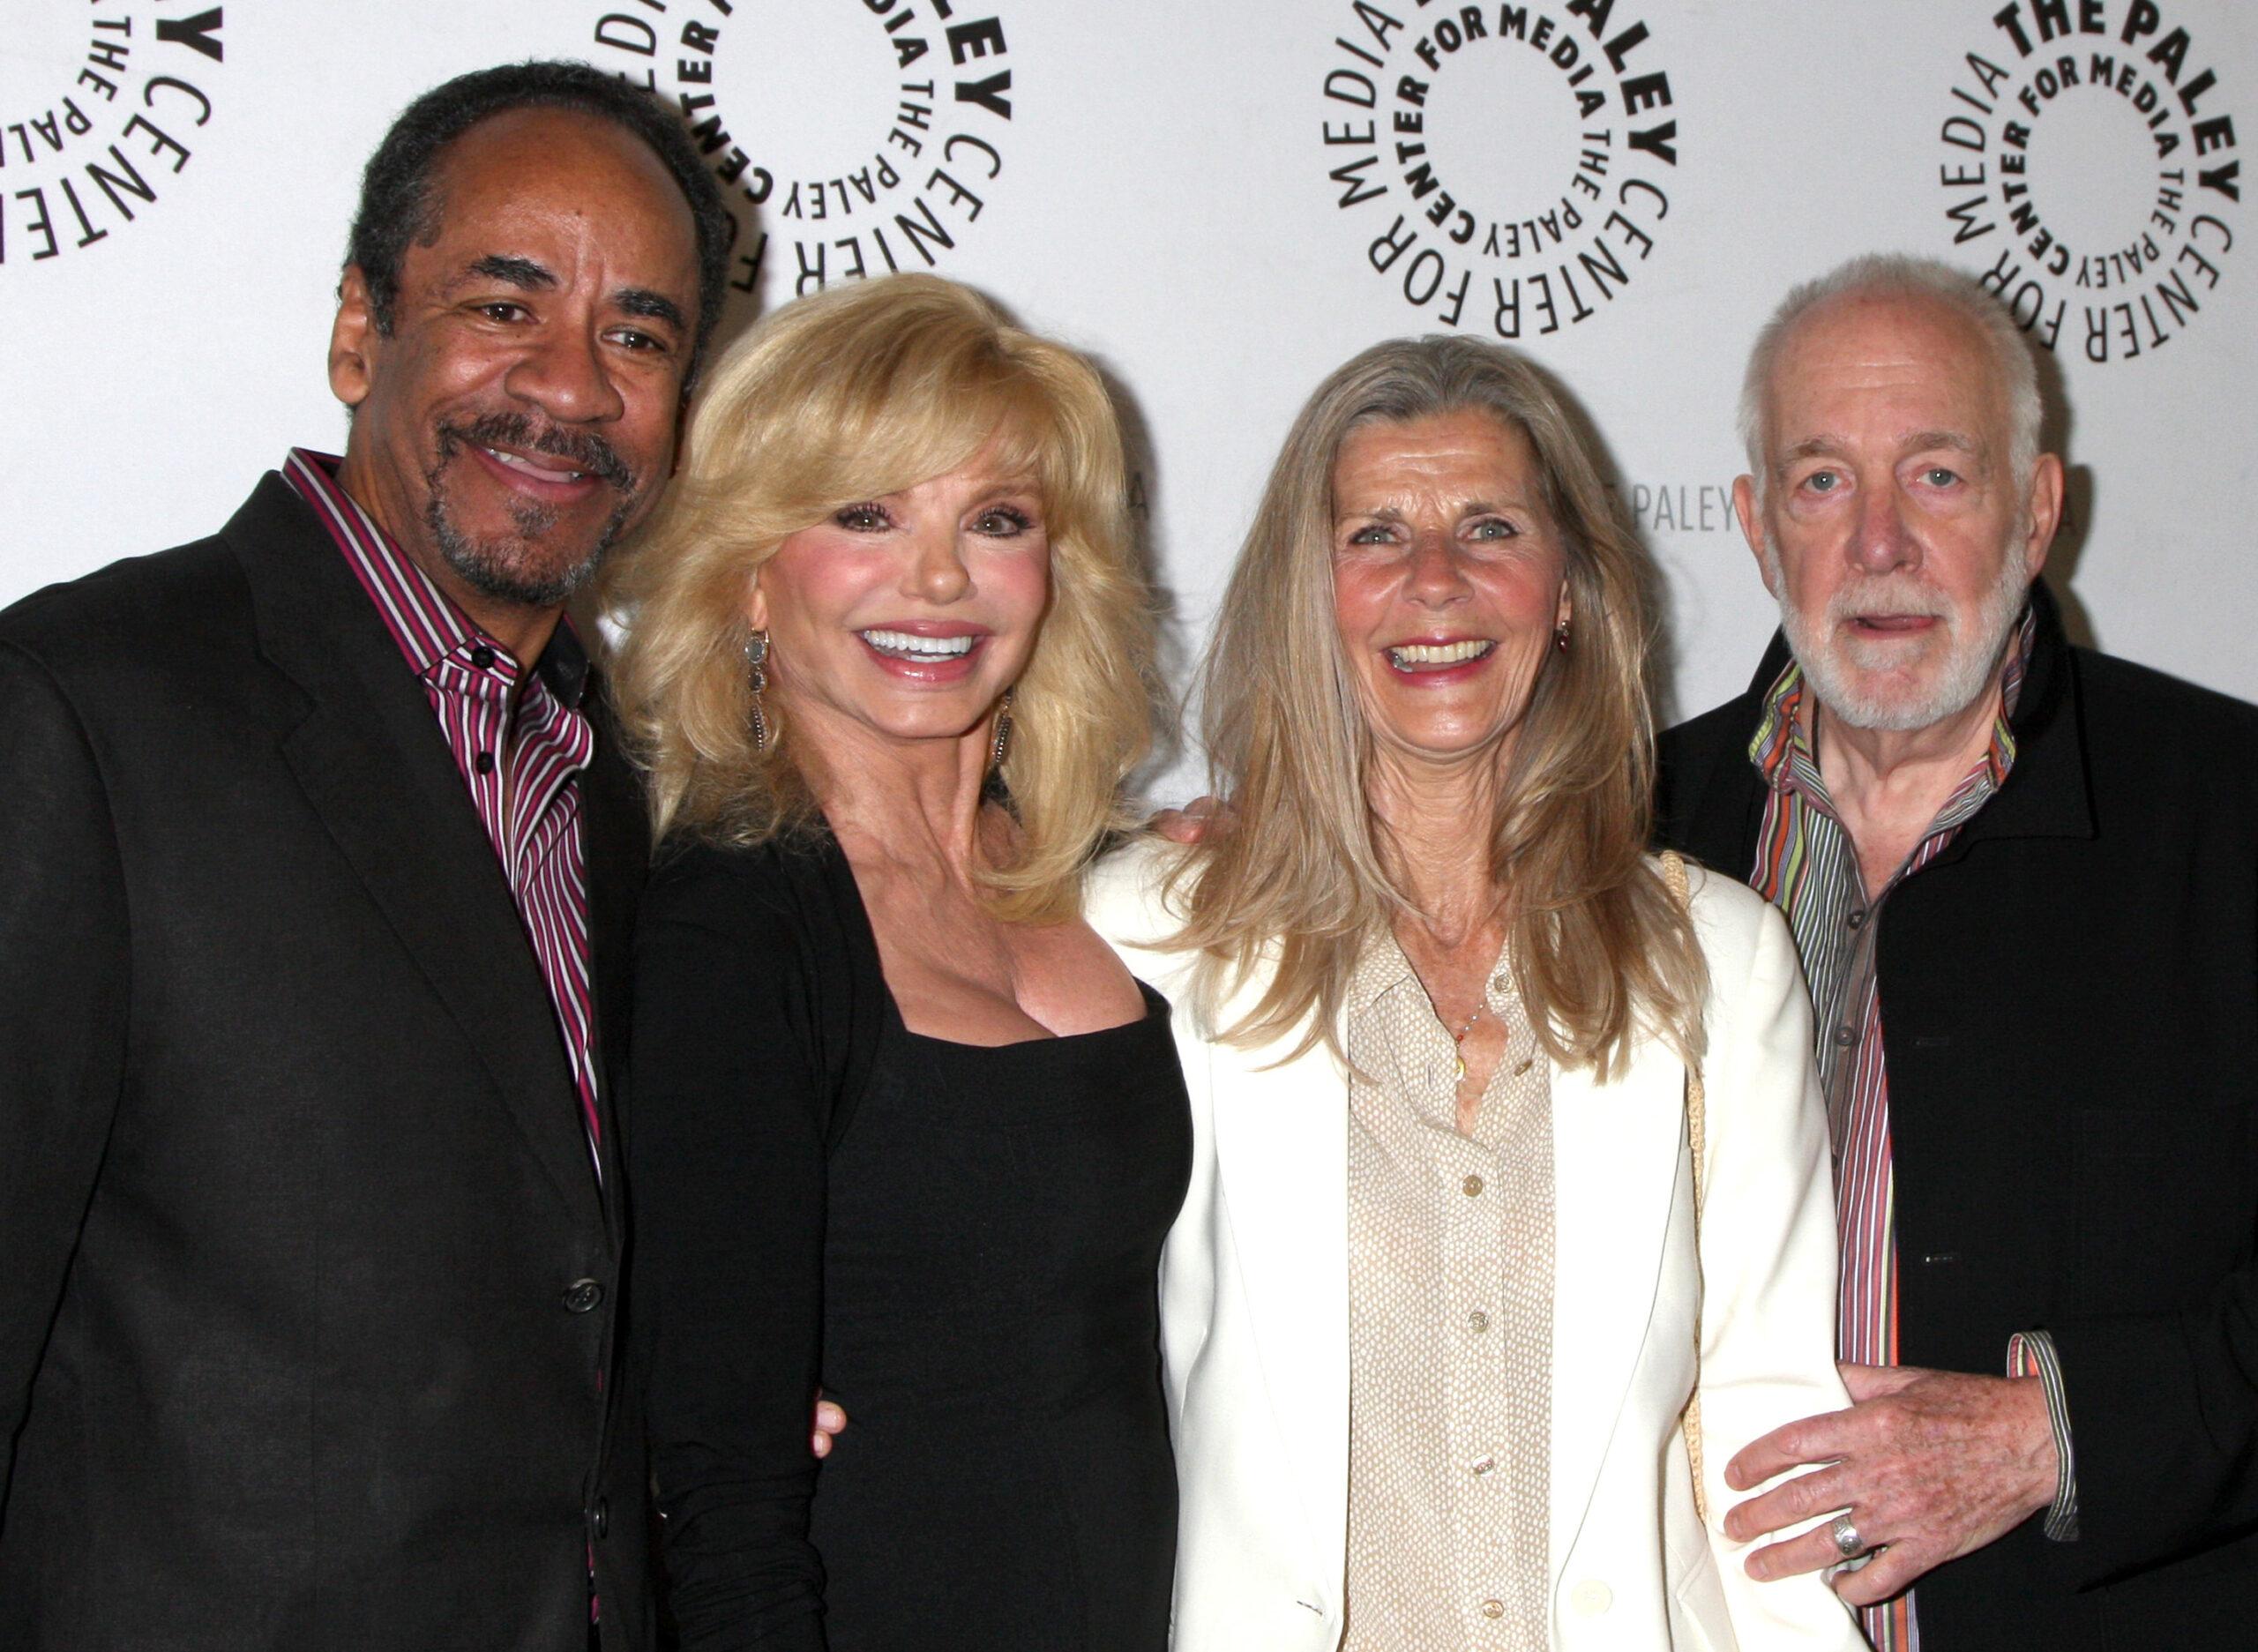 'Baby, If You've Ever Wondered: A WKRP in Cincinnati Reunion' held at Paley Center For Media - Arrivals